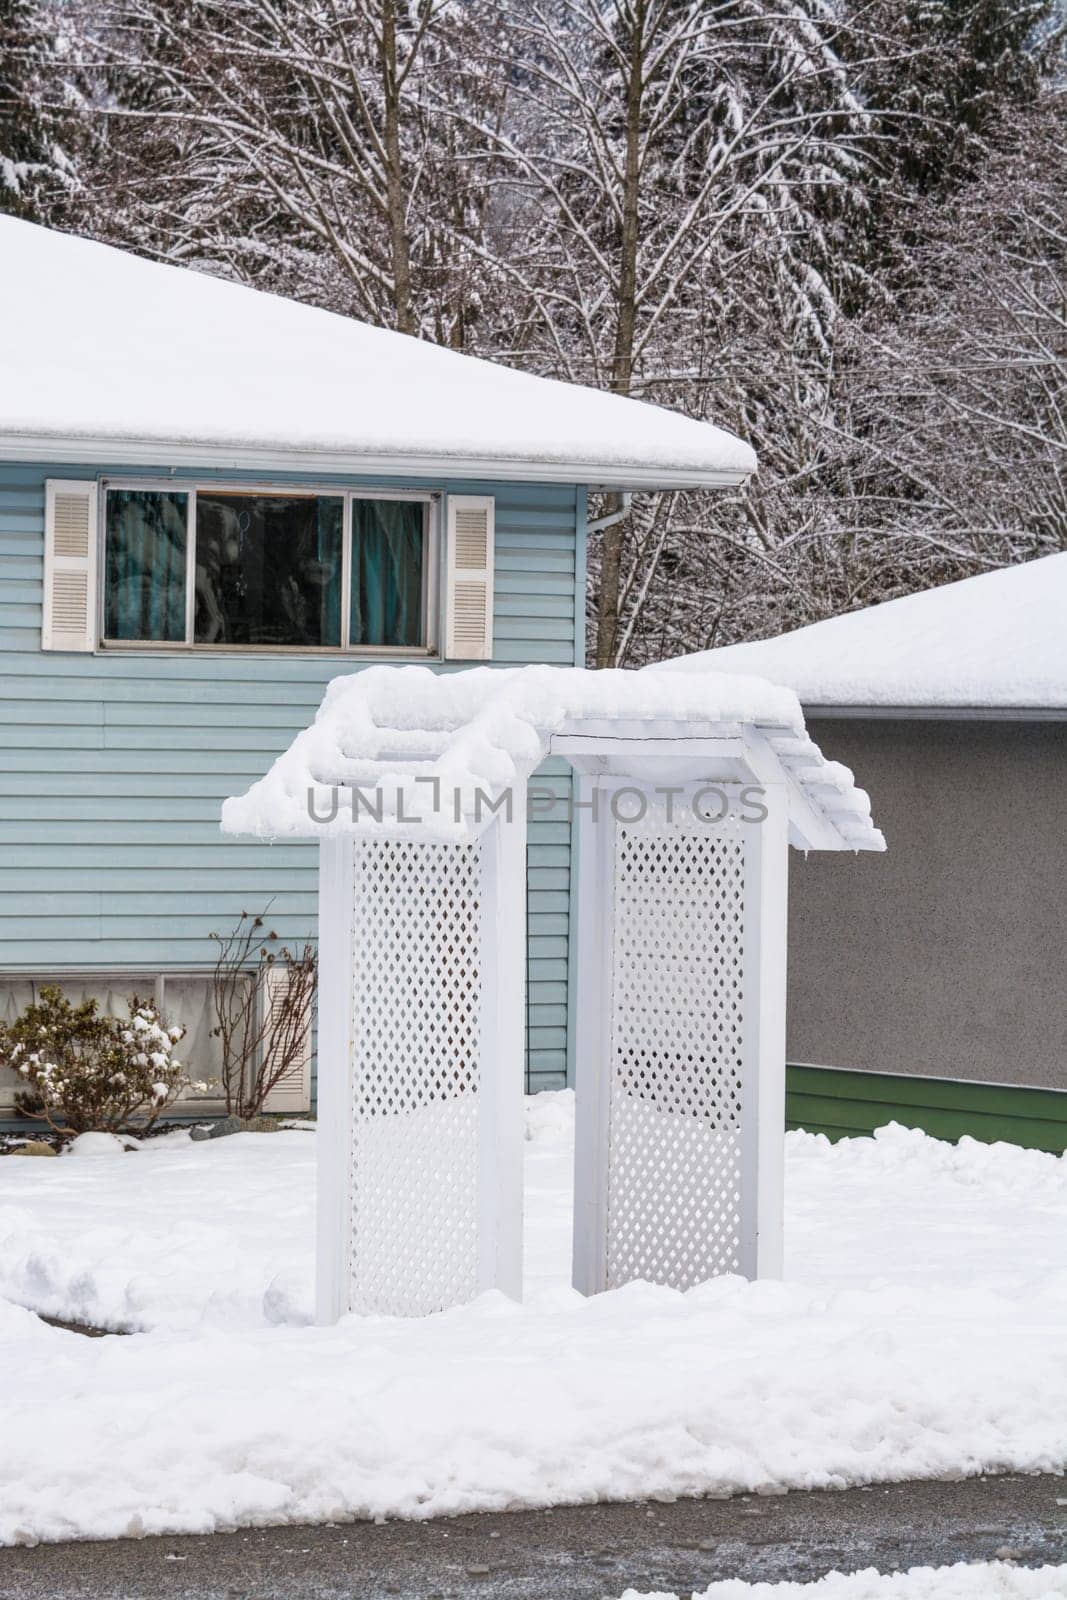 Residential house front yard in snow with entrance arch over pathway by Imagenet